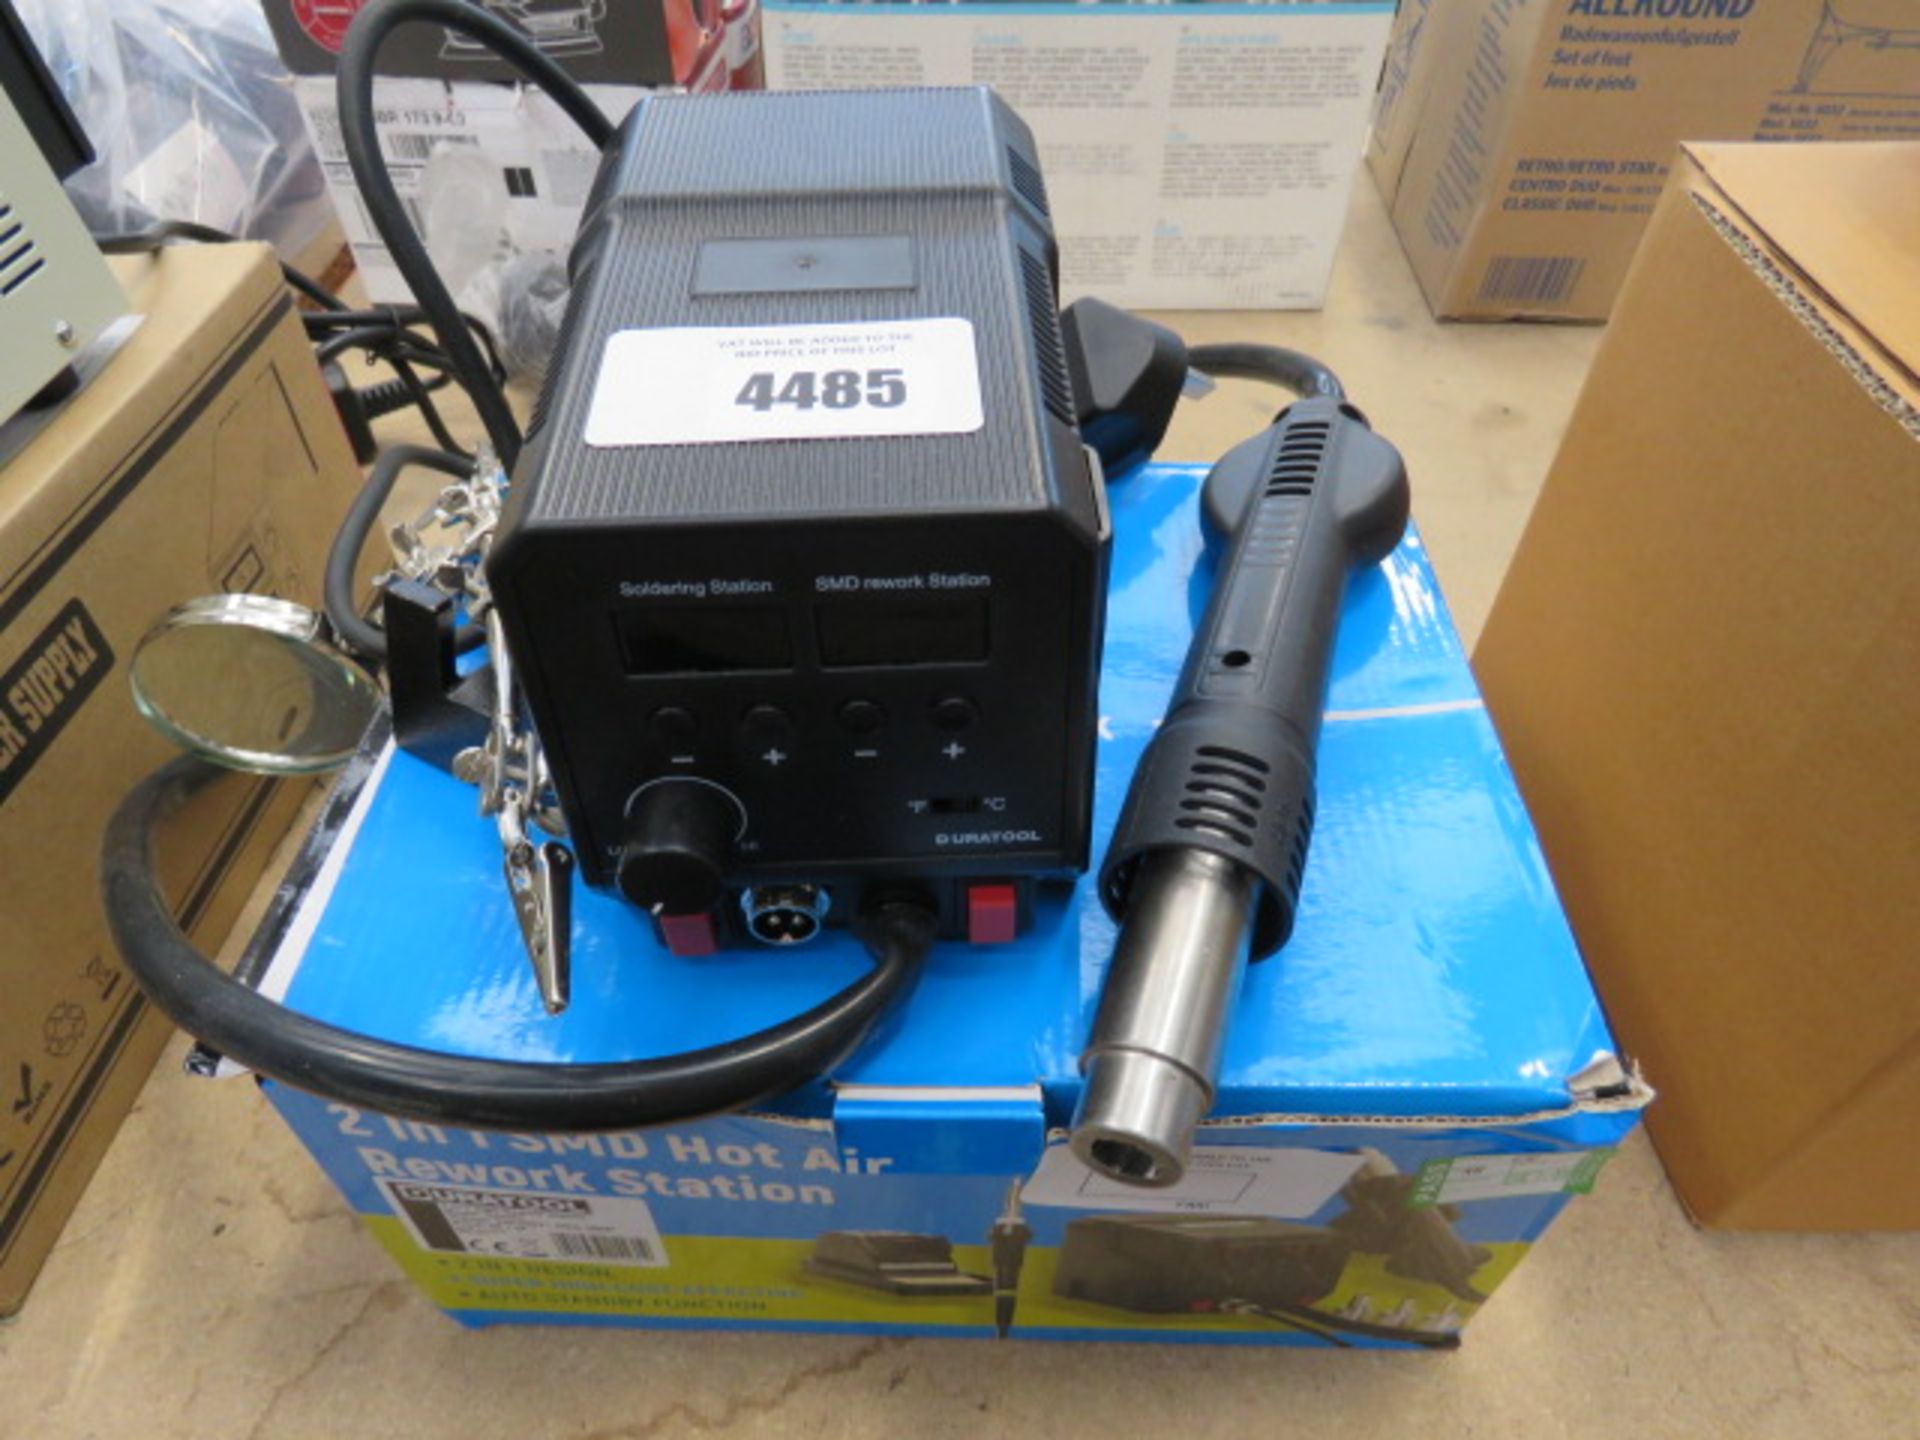 2-in-1 SMD hot air rework station